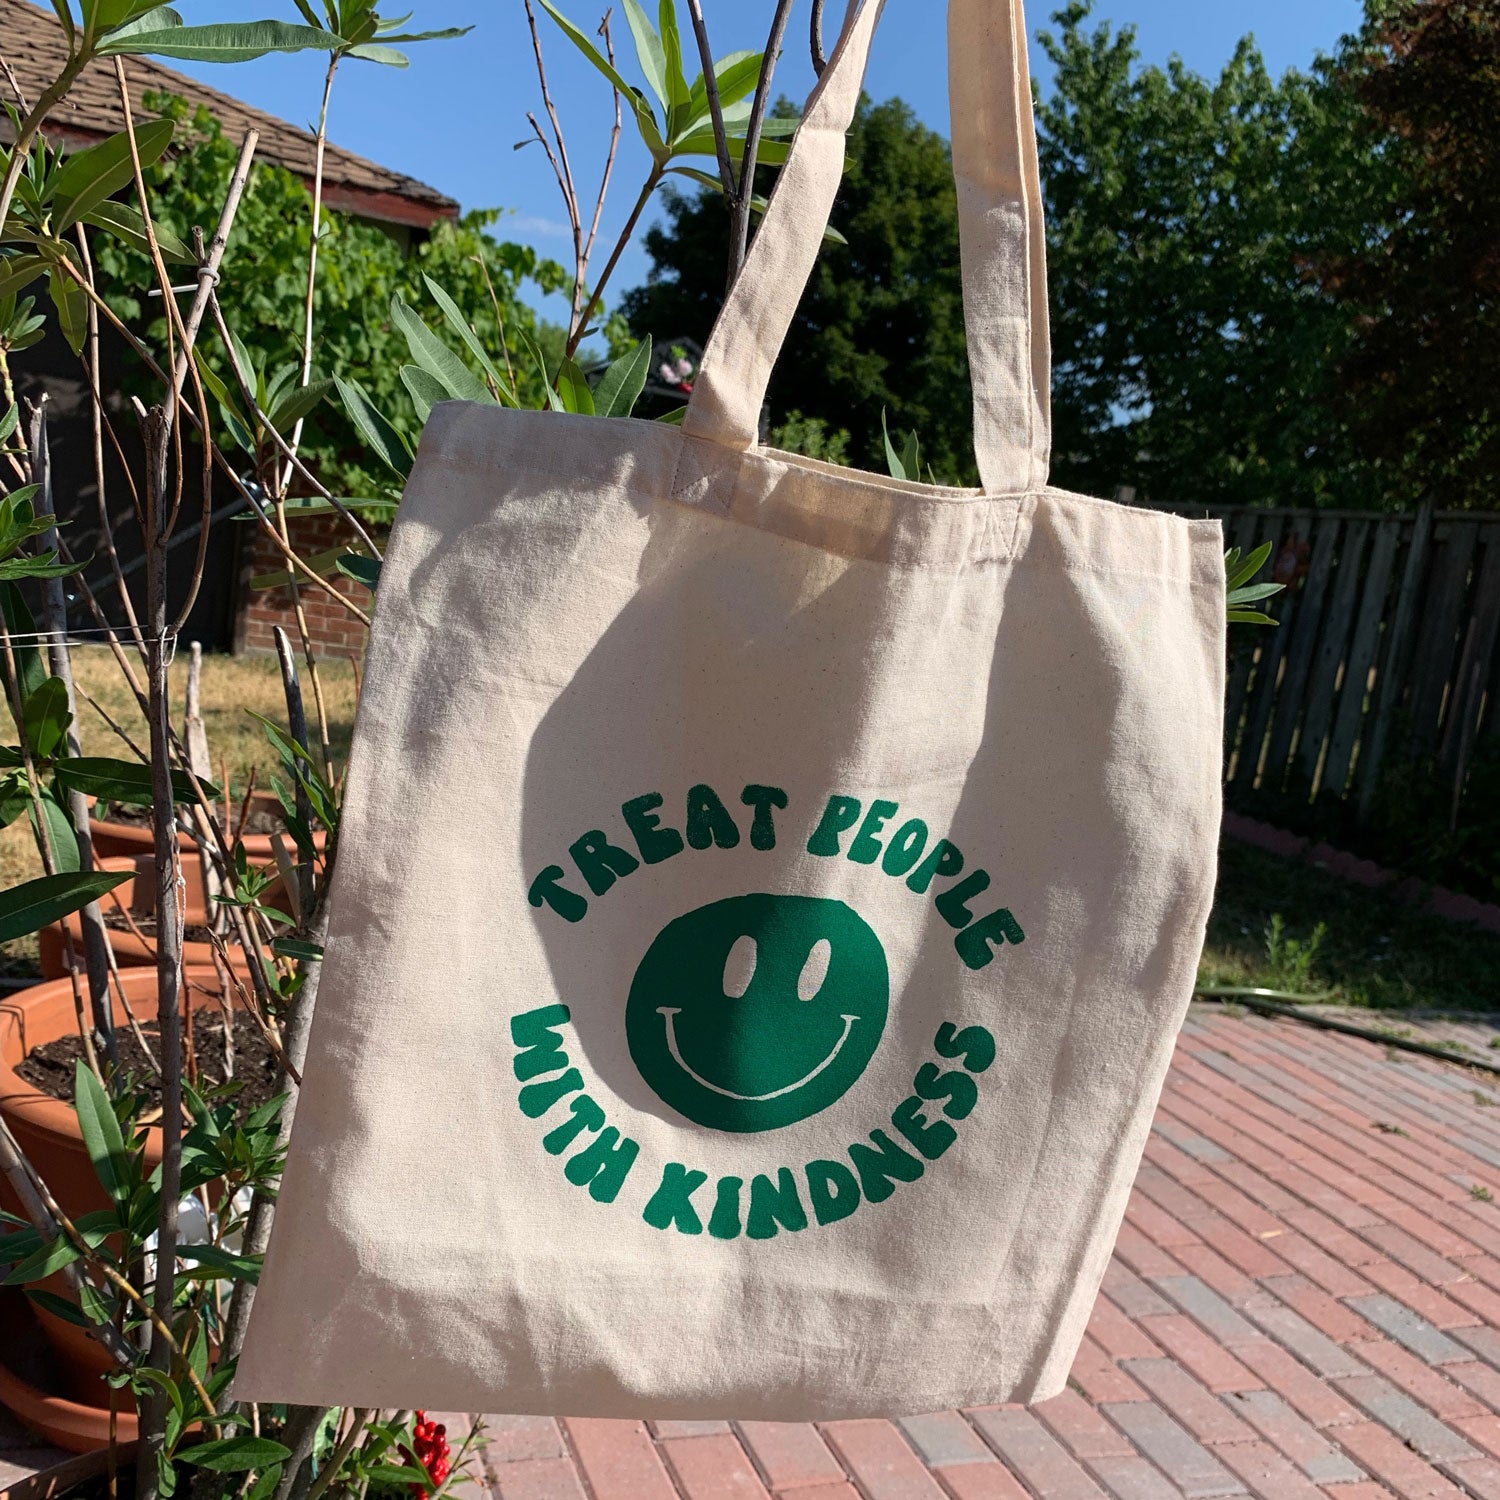 Gallery 22 Treat People with Kindness Tote Bag - Off-White/Green